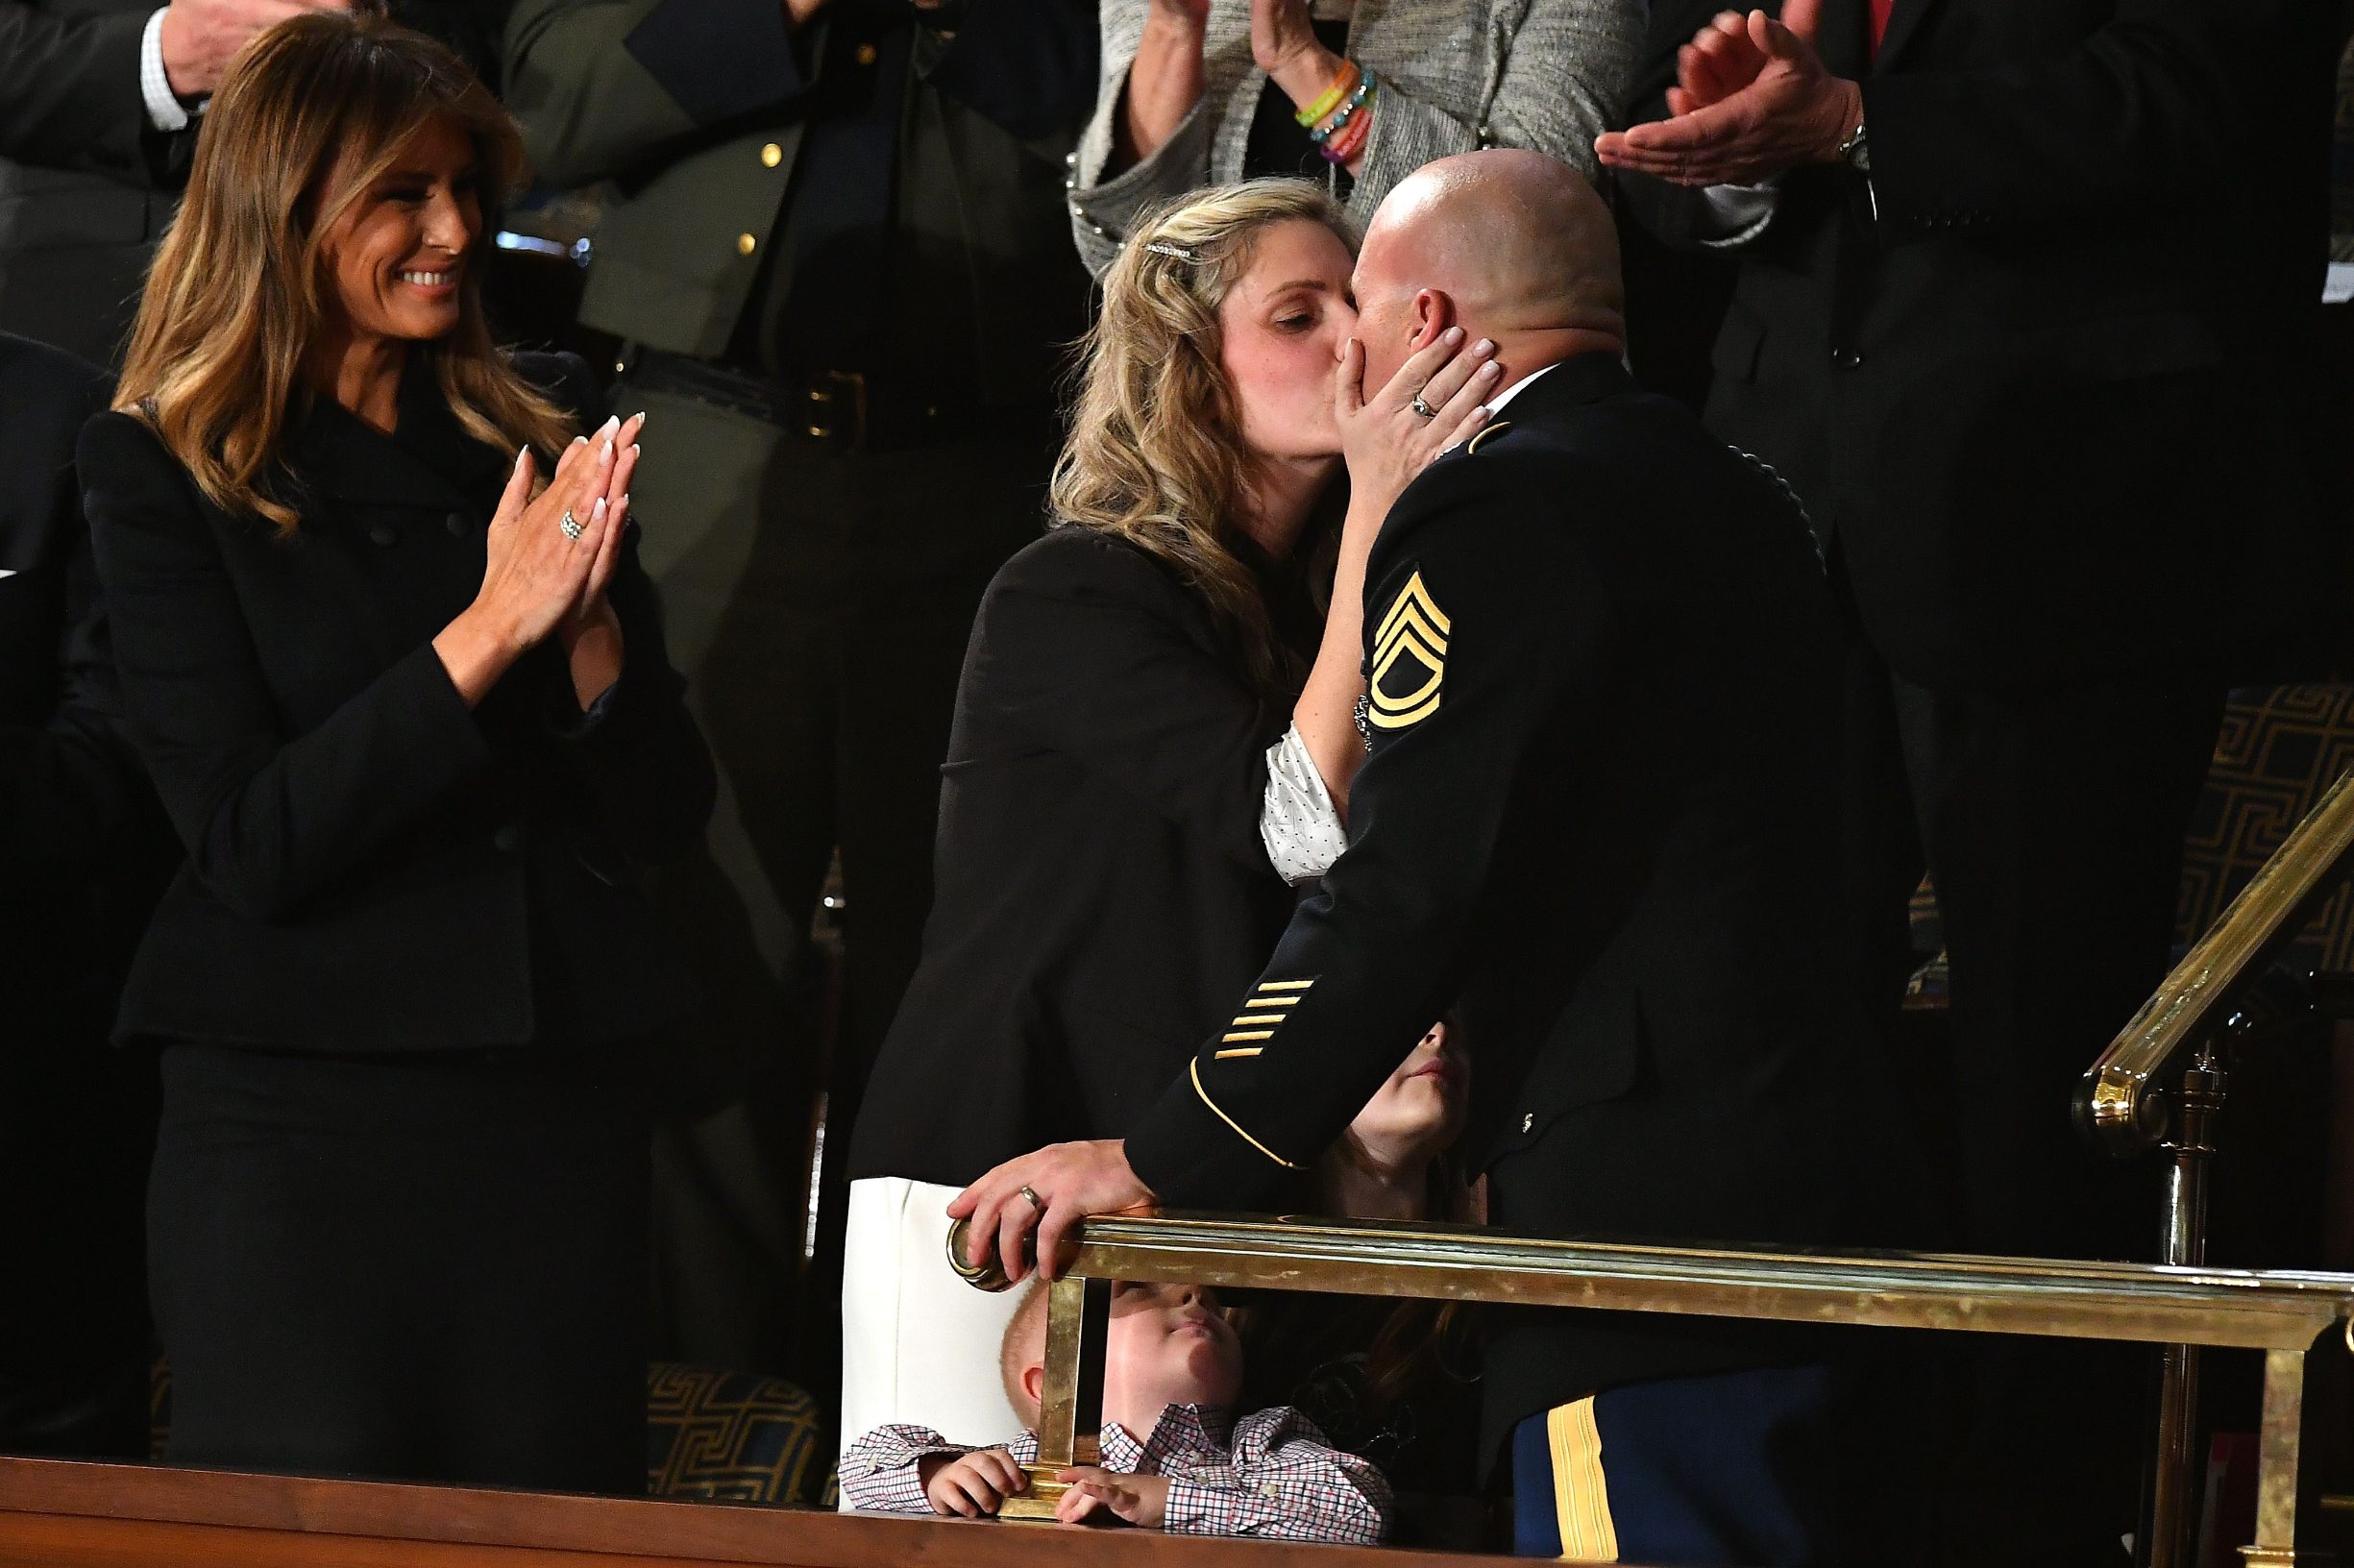 Sgt Townsend Williams (R) kisses his wife Amy (C) after returning from deployment in Afghanistan as First Lady Melania Trump applauds during the State of the Union address at the US Capitol in Washington, DC, on February 4, 2020. (Photo by MANDEL NGAN / AFP)